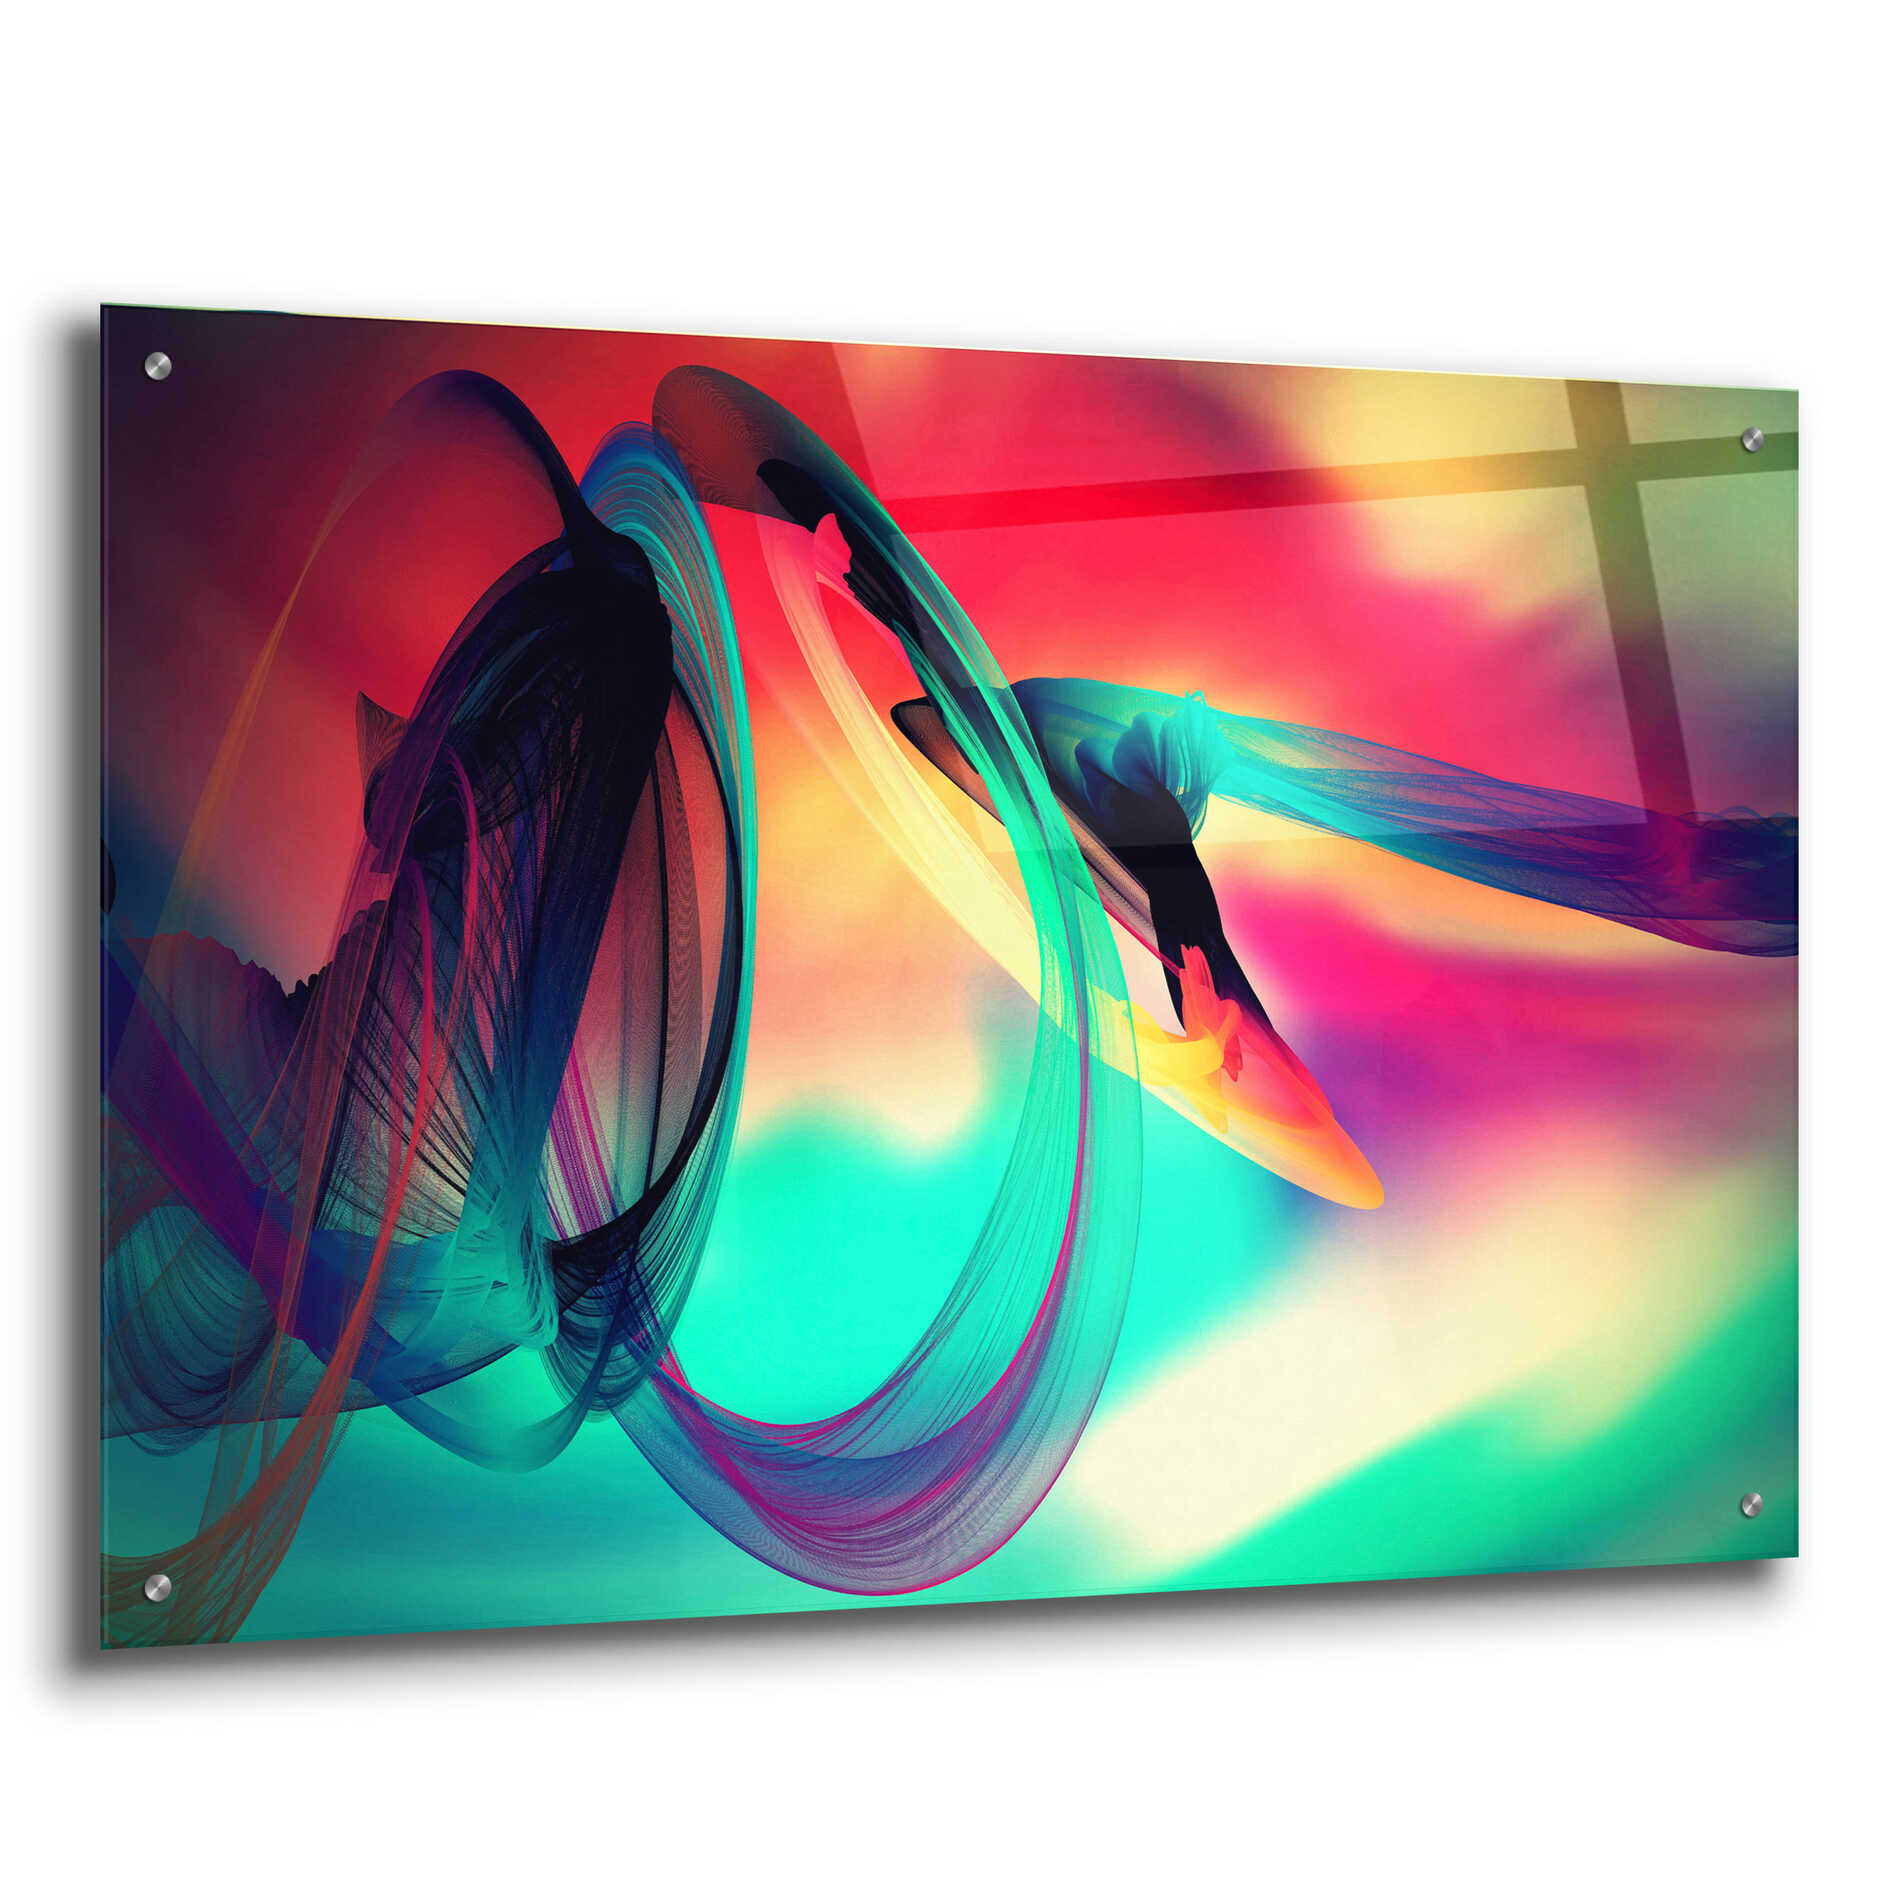 Epic Art 'Color In The Lines 27' by Irena Orlov, Acrylic Glass Wall Art,36x24